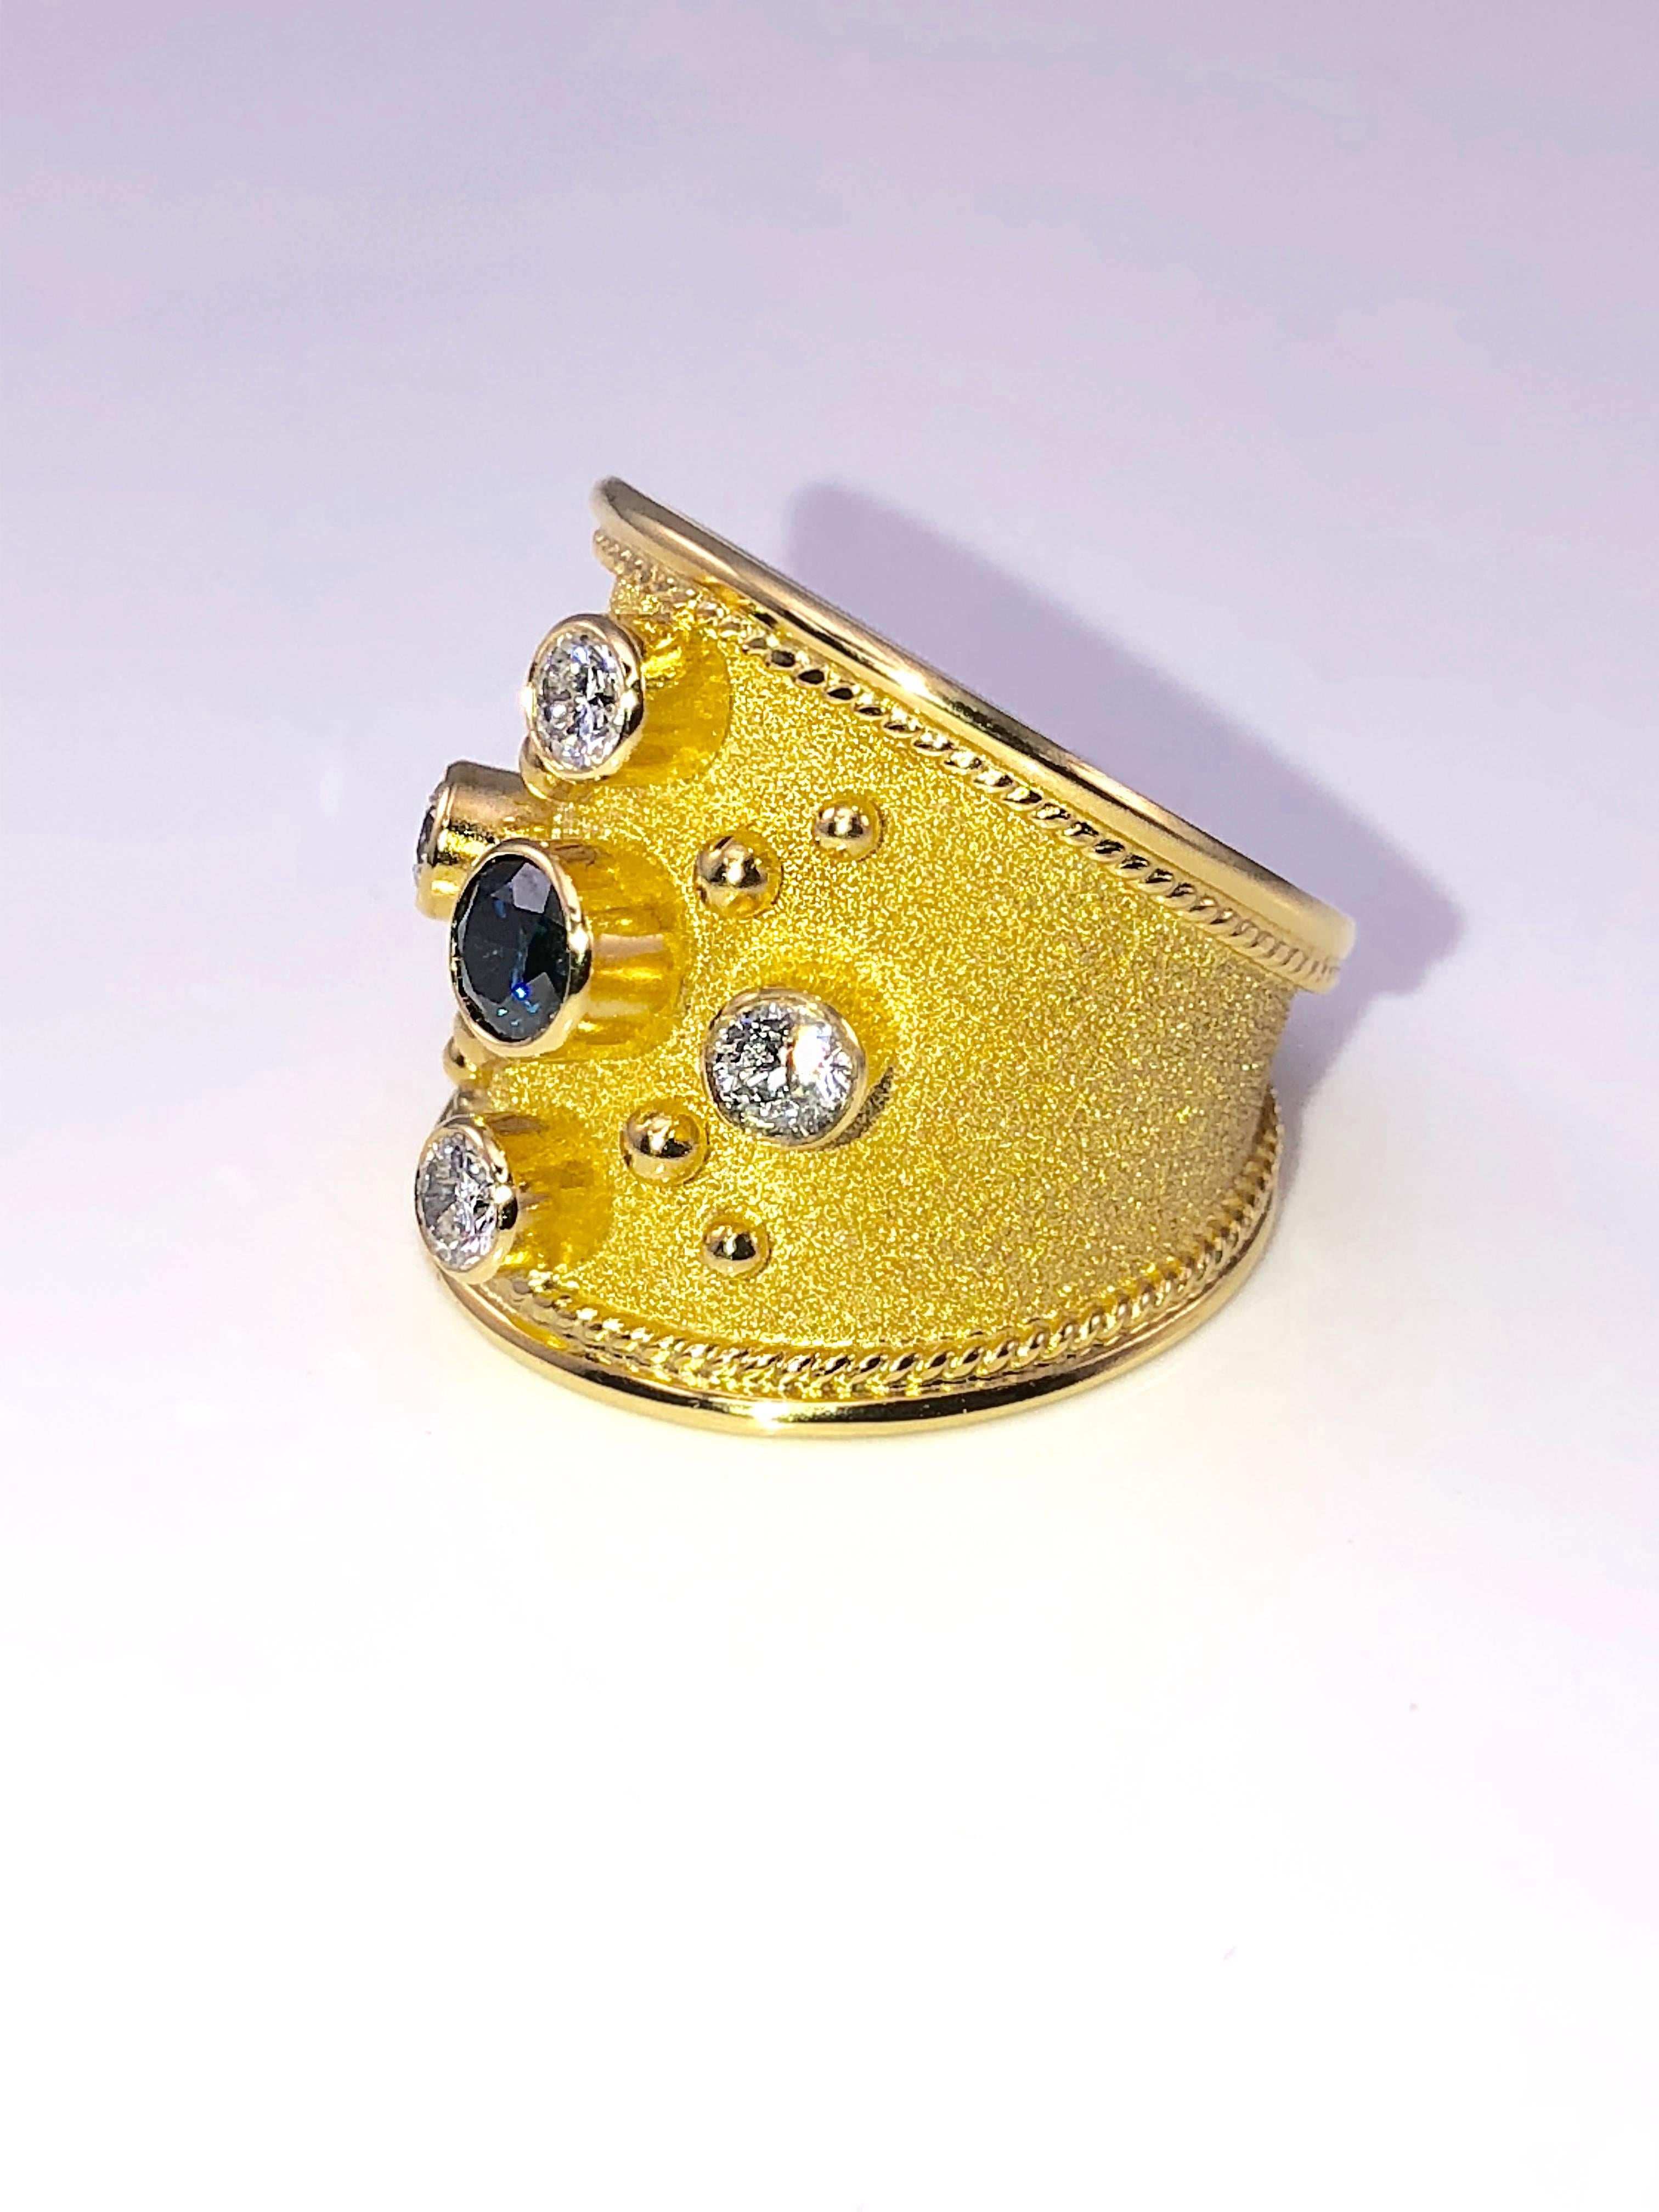 Unique S.Georgios designer 18 Karat Yellow Gold Ring all handmade with Byzantine Granulation workmanship and a gorgeous velvet finish on the background. The gorgeous ring features one Brilliant cut Blue Diamond total weight of 0.42 Carat in the